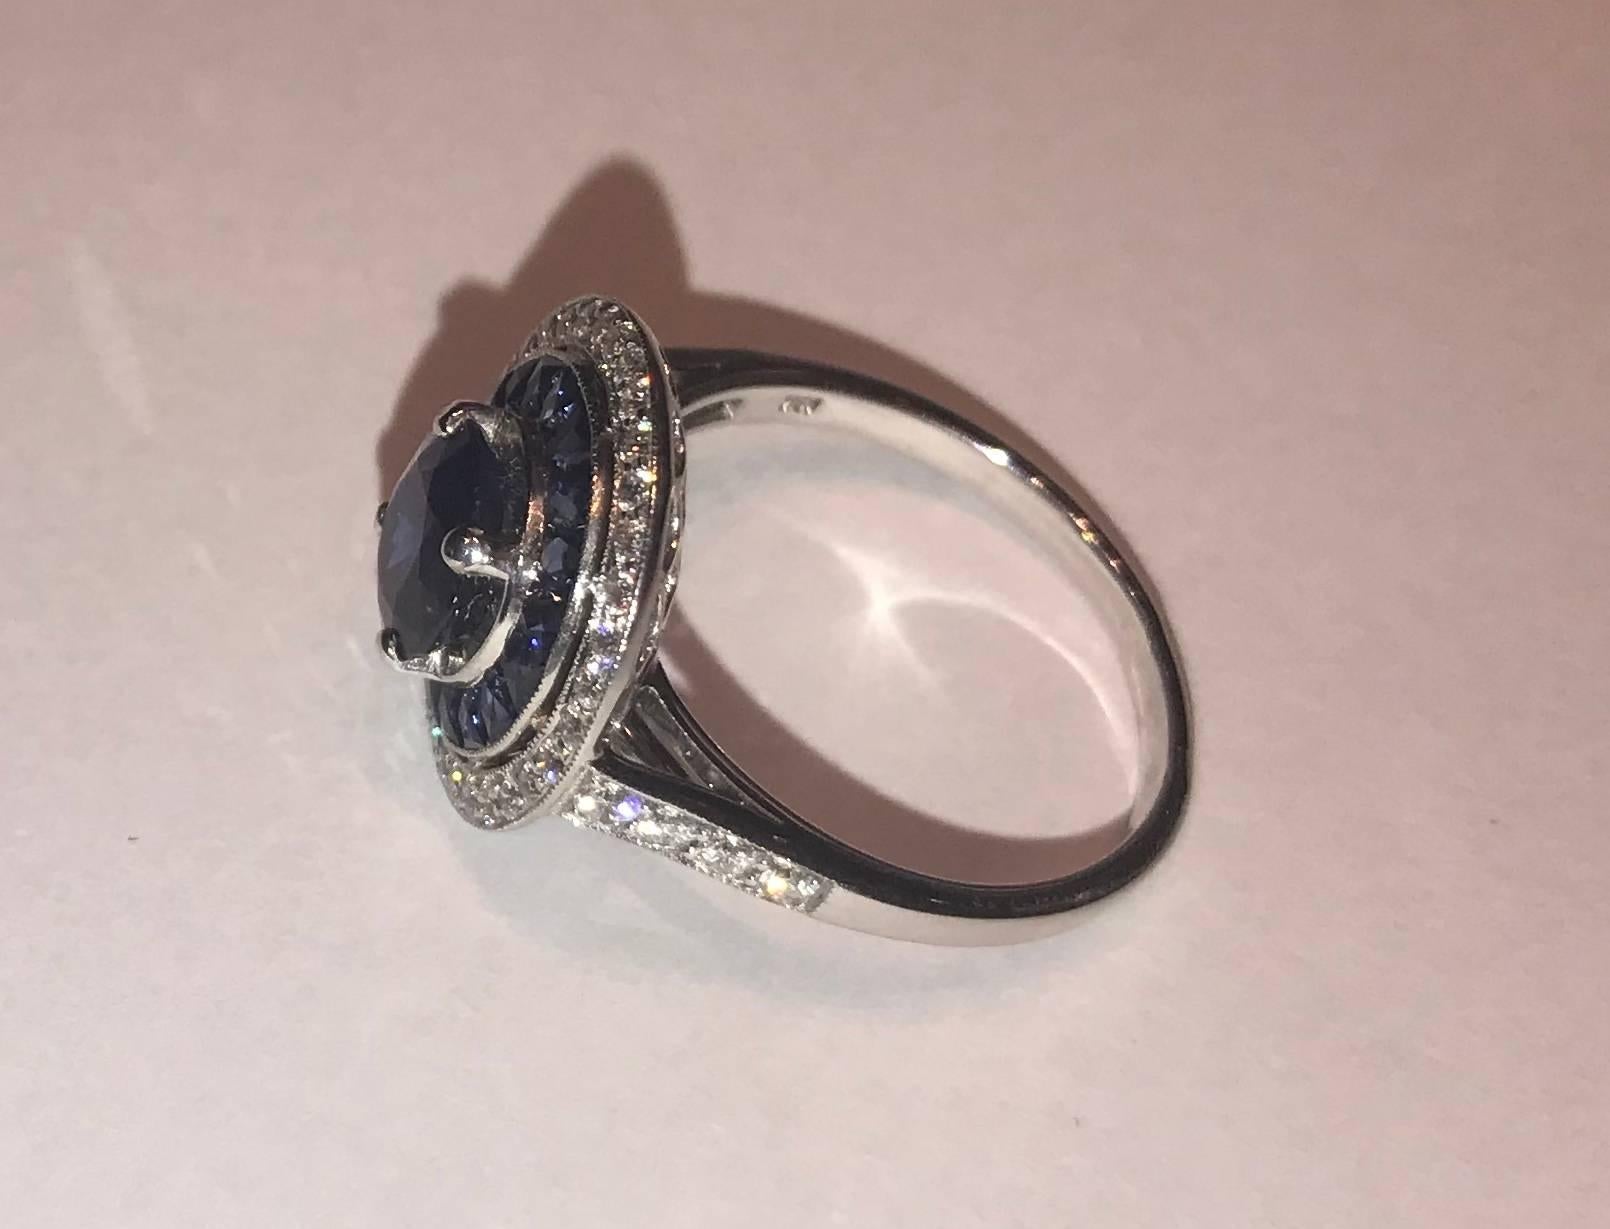 The Victorine ring is in 18 carat white gold set with a round sapphire weighing 2,80 carats surrounded by caliber cut sapphire and 0,60 carats of brillant- cut diamonds.

As a familly tradition, Valerie Danenberg is a jewelry designer and a